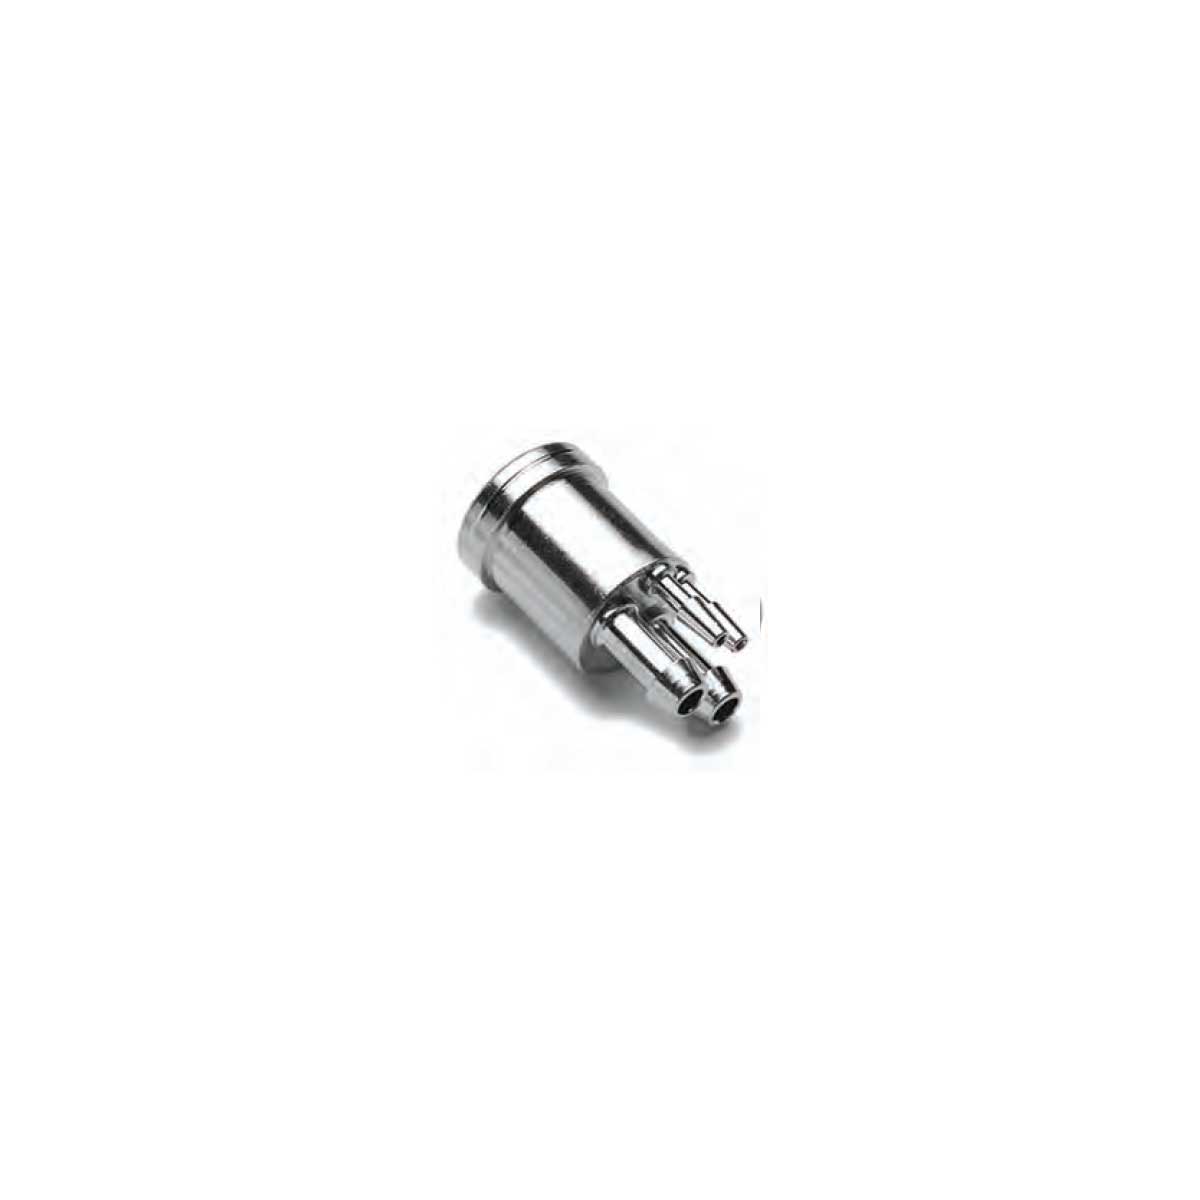 4-hole Adapter, Metal • Quality plated brass #52039